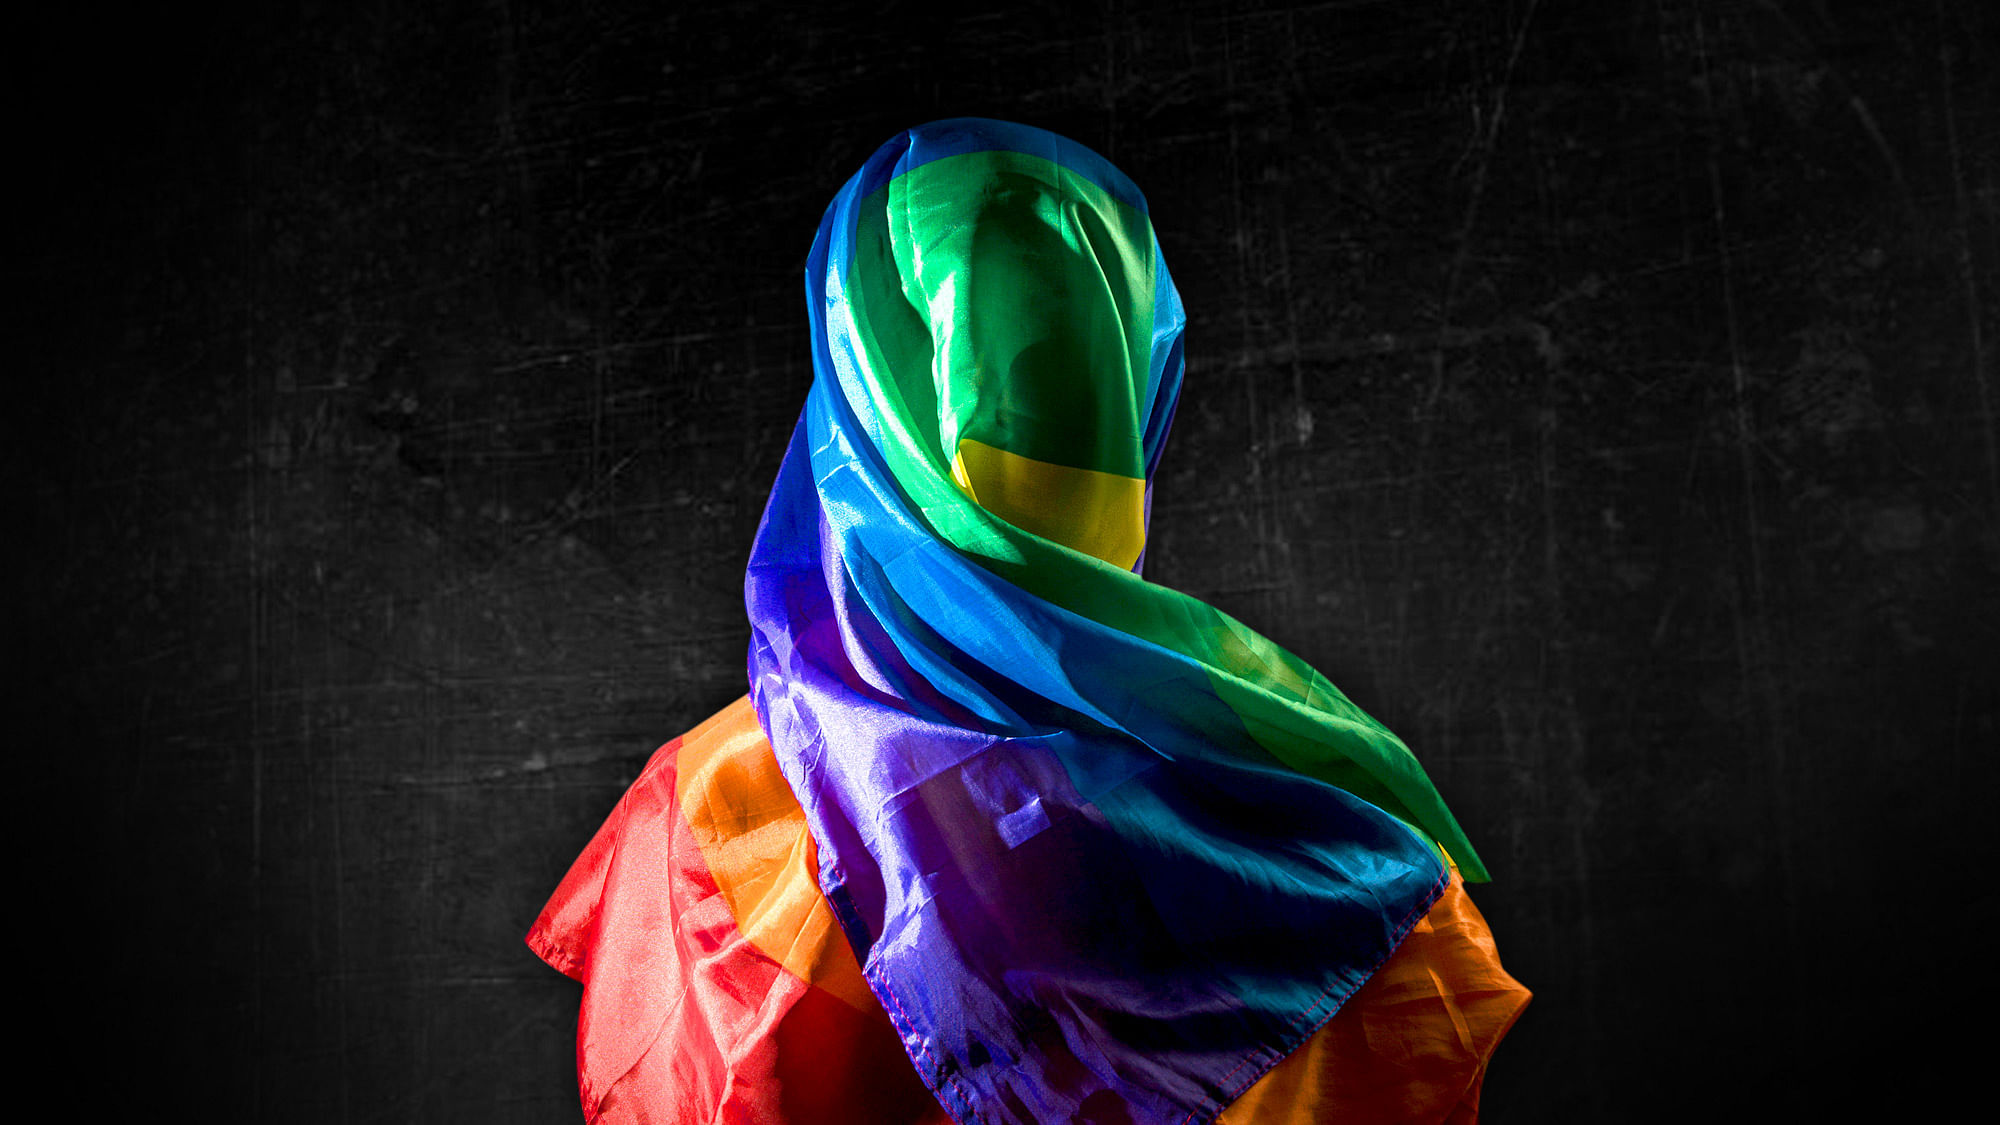 In 80 countries where homosexuality is illegal, millions of people are being discriminated against. (Photo: iStockphoto)